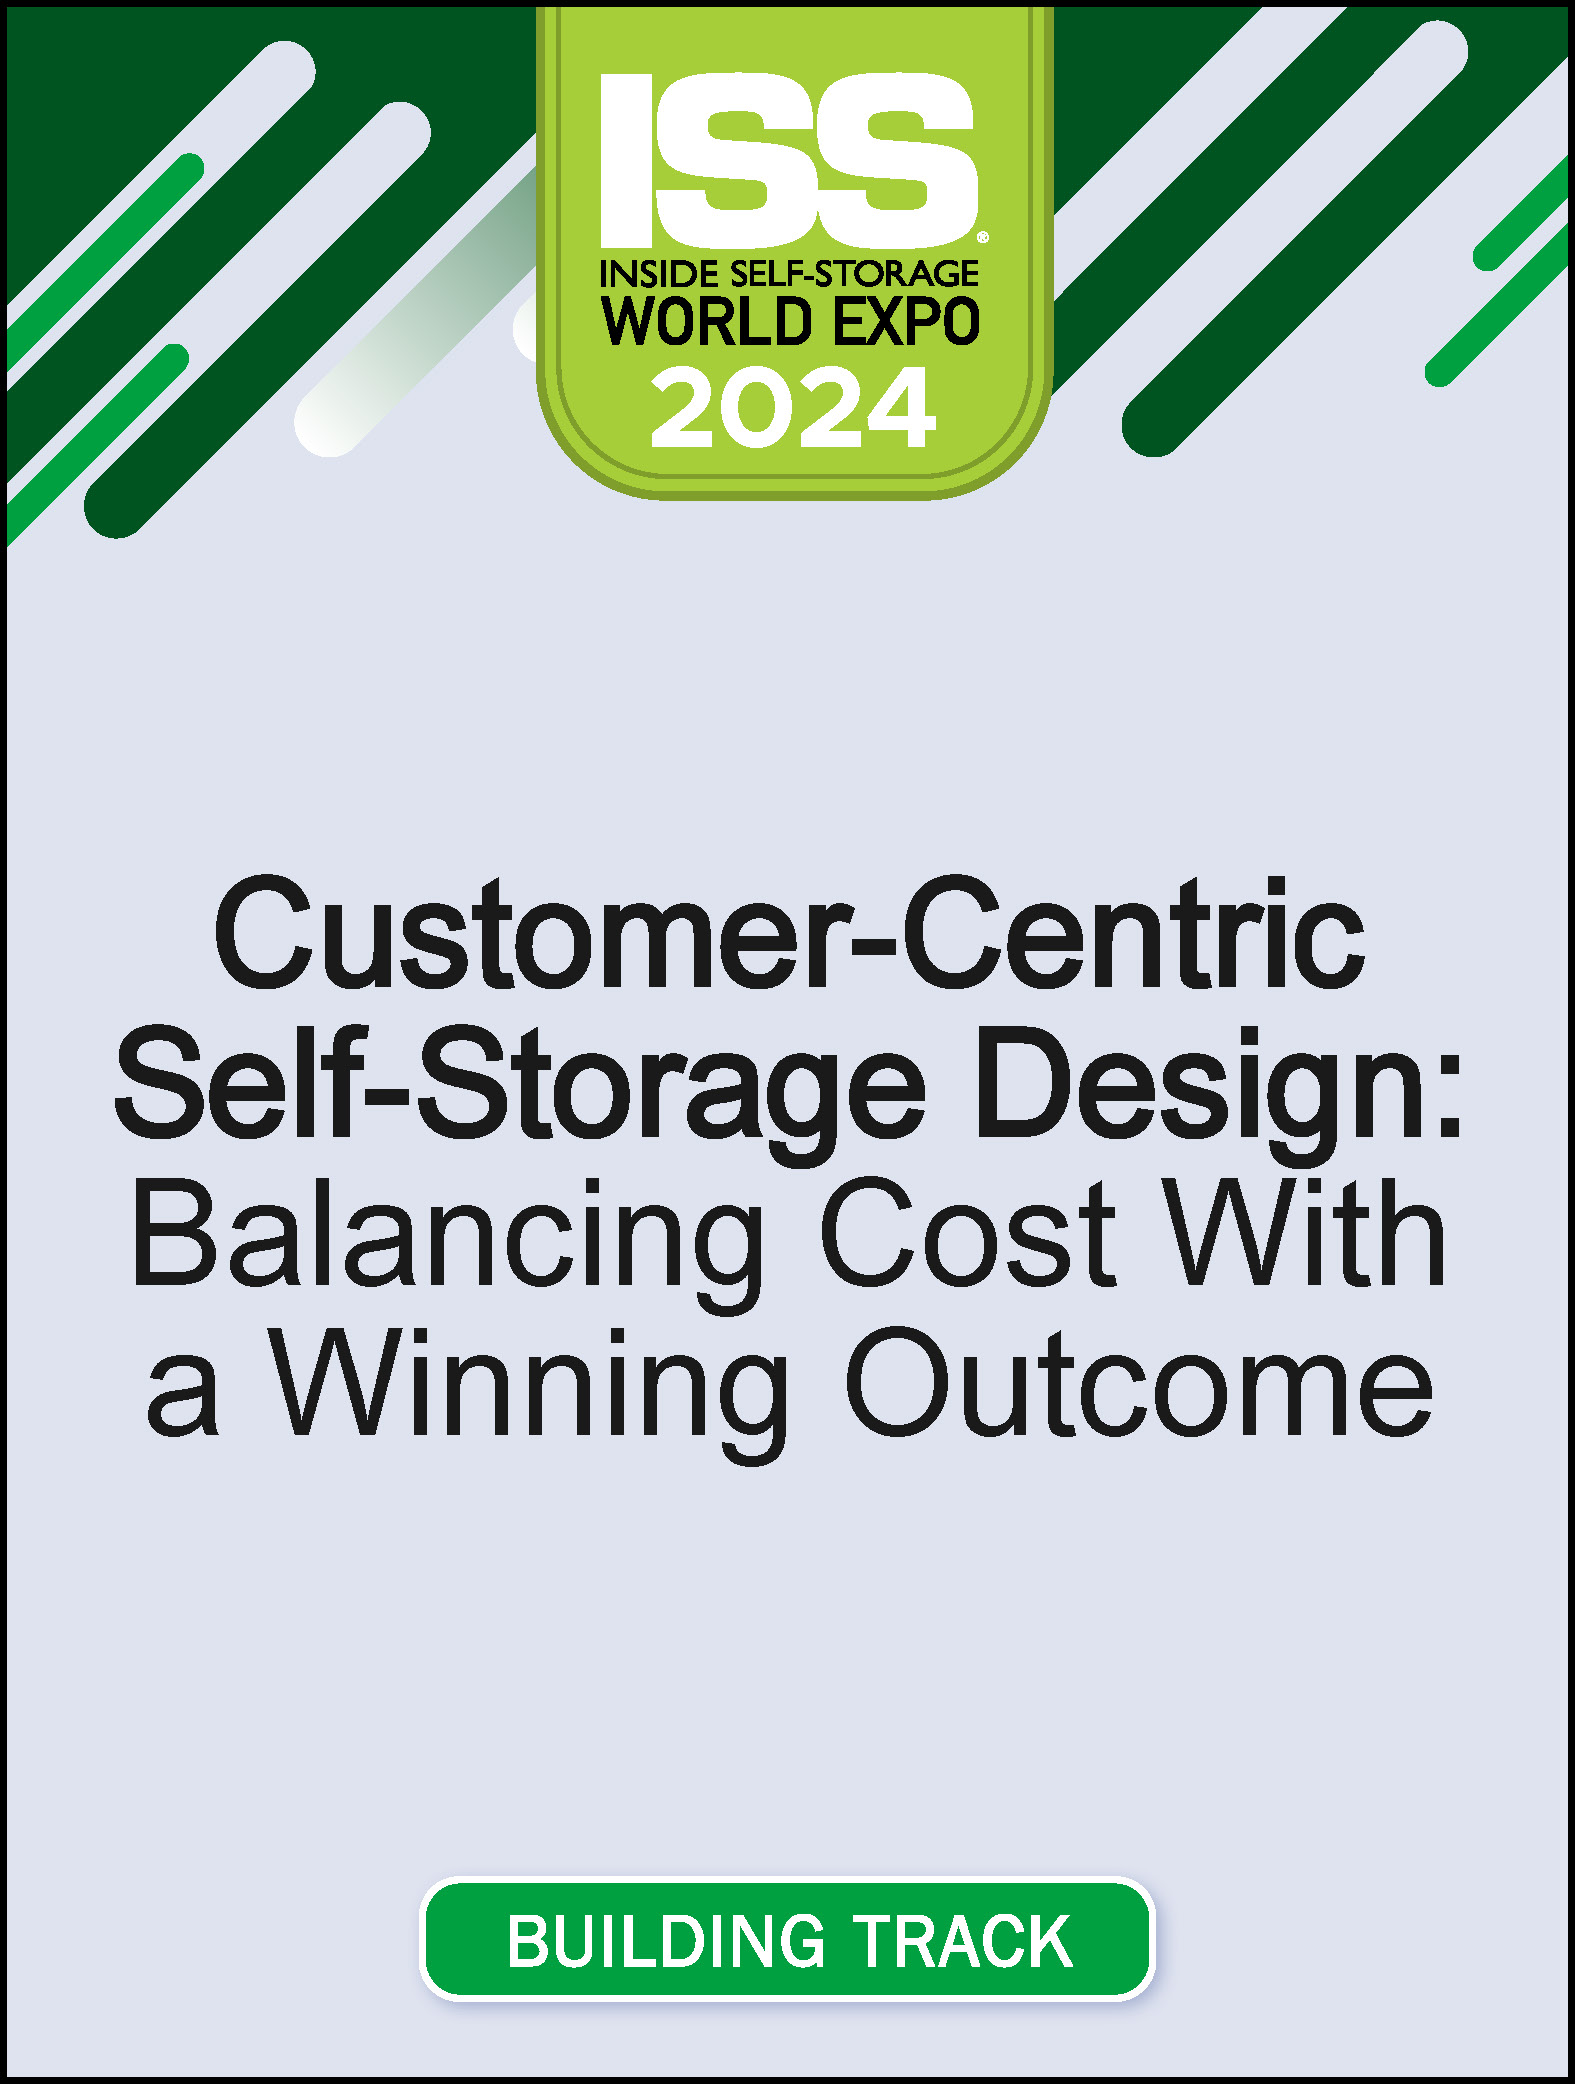 Video Pre-Order Sub - Customer-Centric Self-Storage Design: Balancing Cost With a Winning Outcome